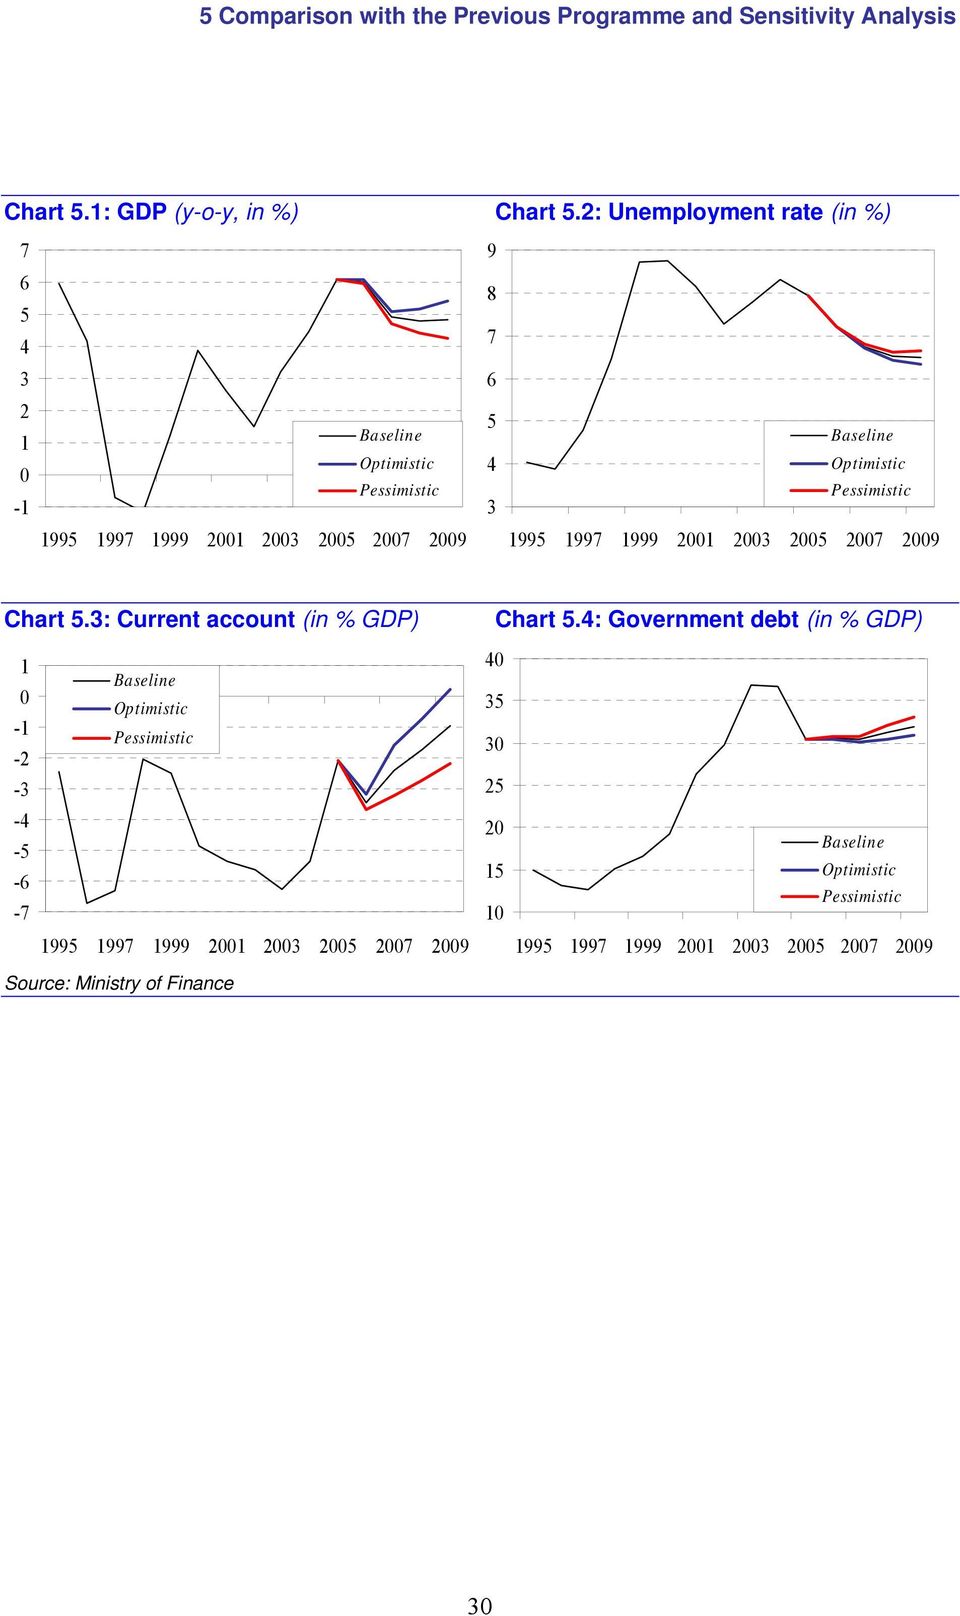 5 4 3 Chart 5.3: Current account (in % GDP) Chart 5.